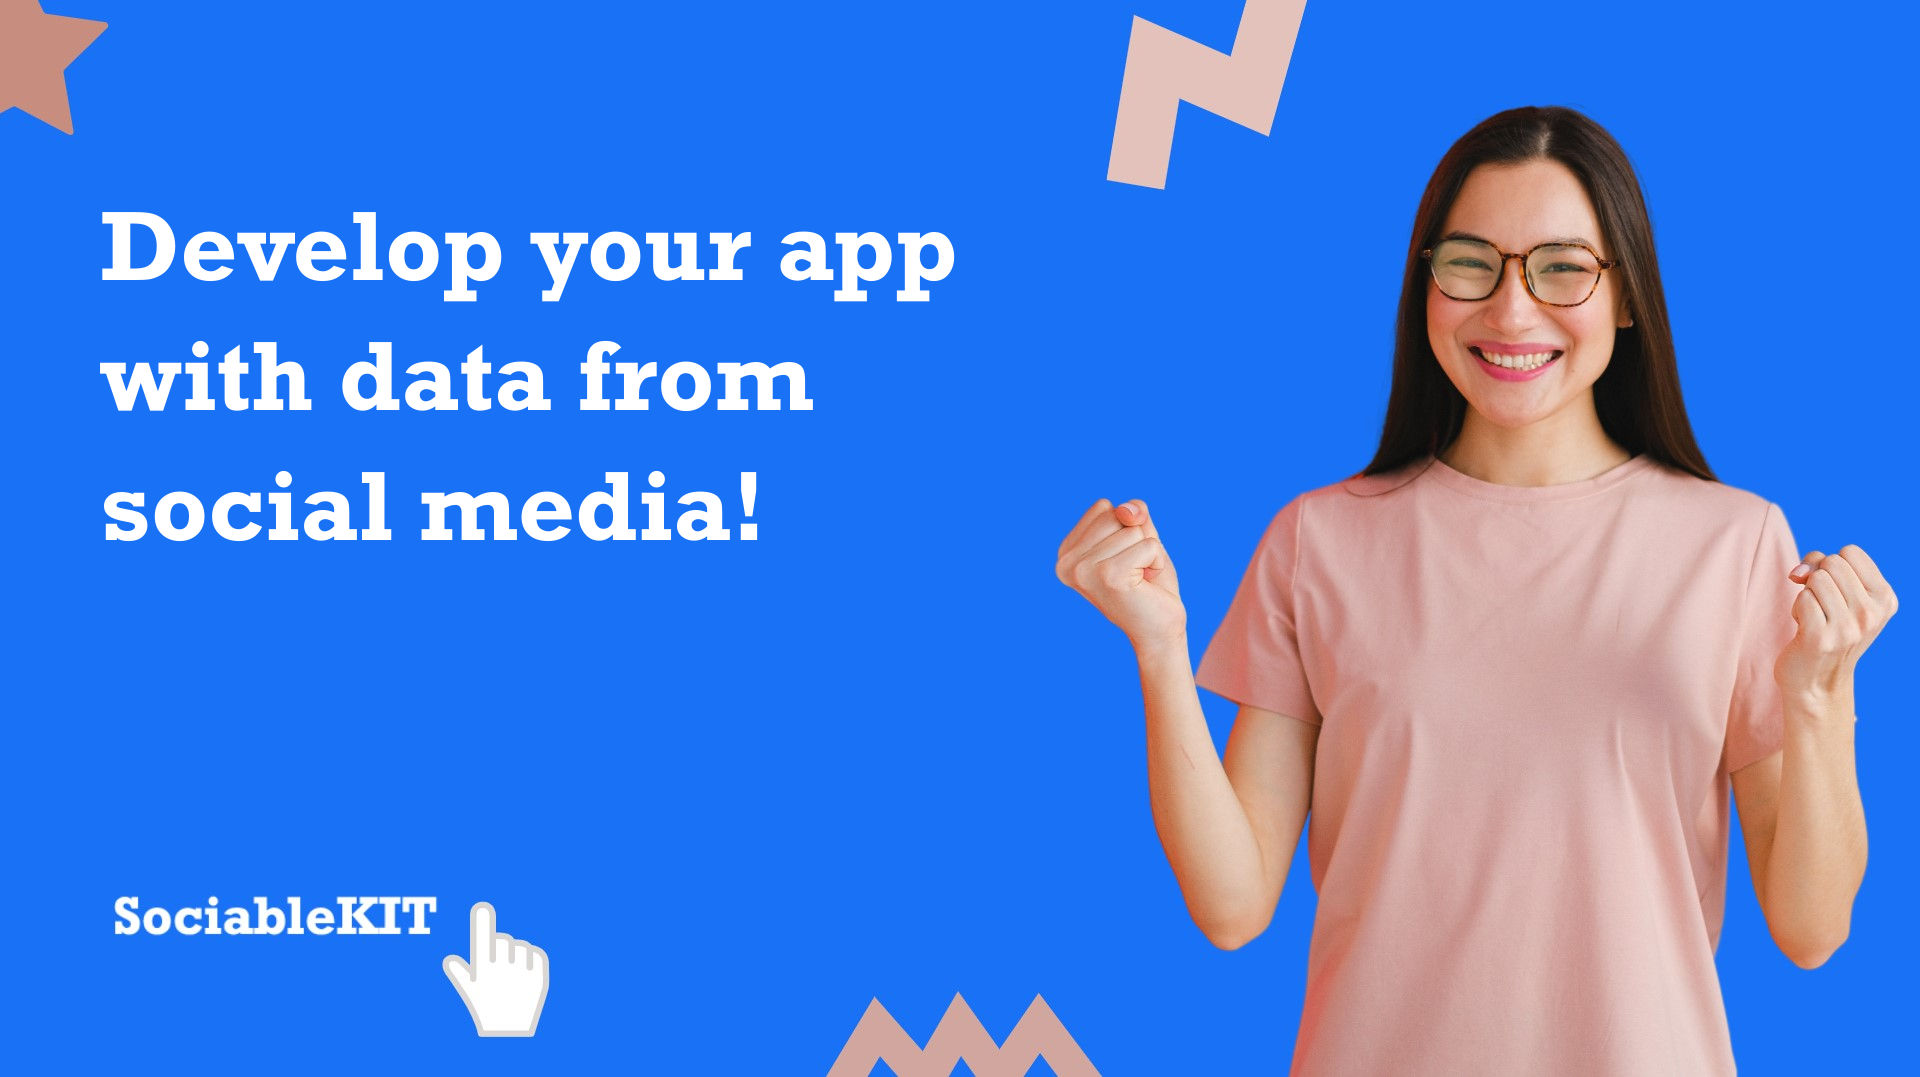 Develop your app with data from social media